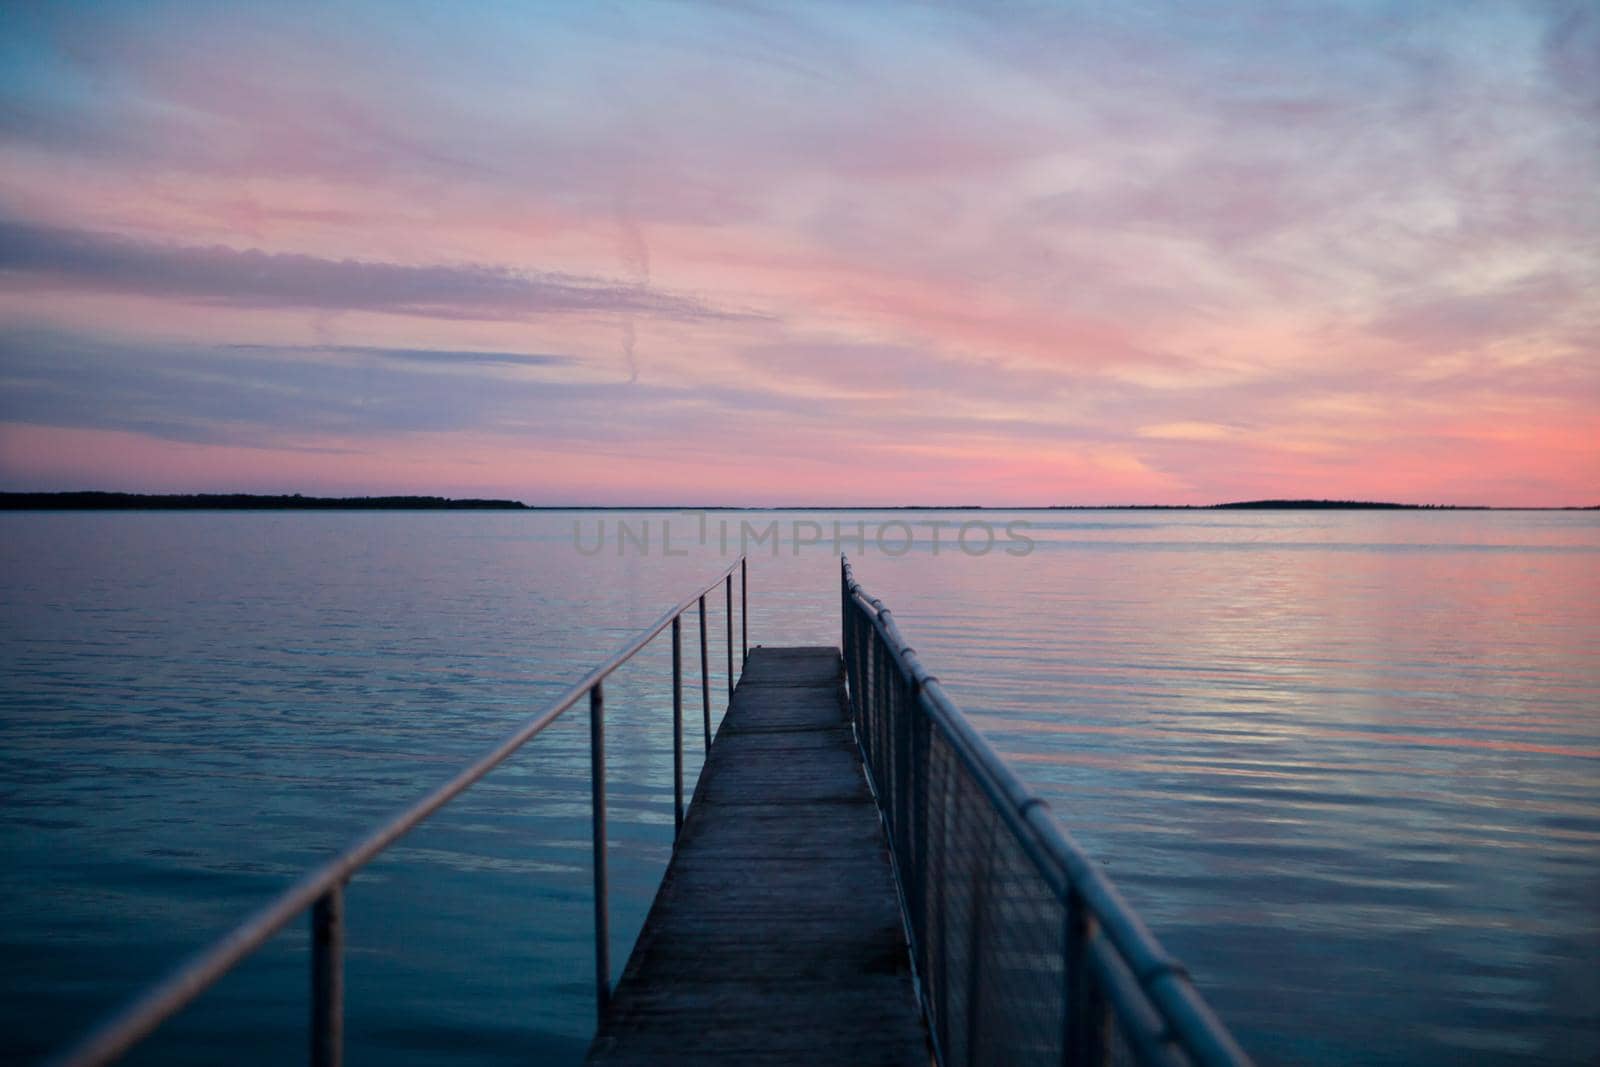 pink sunset at wooden pier on the blue sea. pink sunset at wooden pier on the blue sea. Beautiful view of long jetty. Minimal image with jetty stretching to the ocean. Warm tones of orange, yellow, pink, blue and purple. Smooth water and reflection